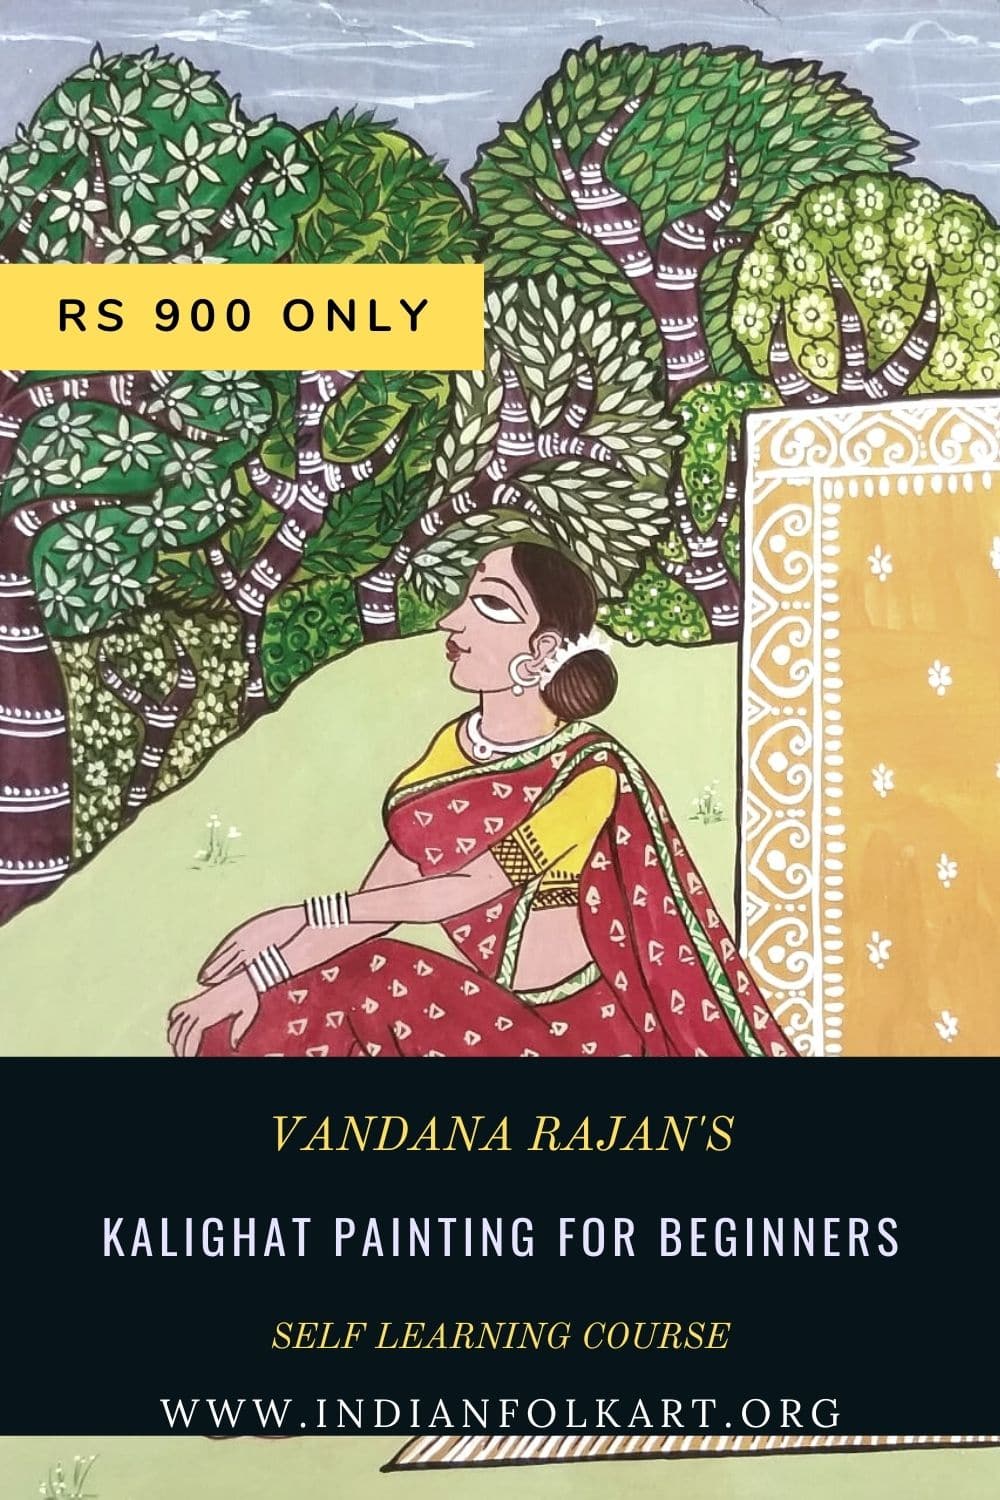 VR02 – Kalighat Painting For Beginners, “The Waiting Woman”